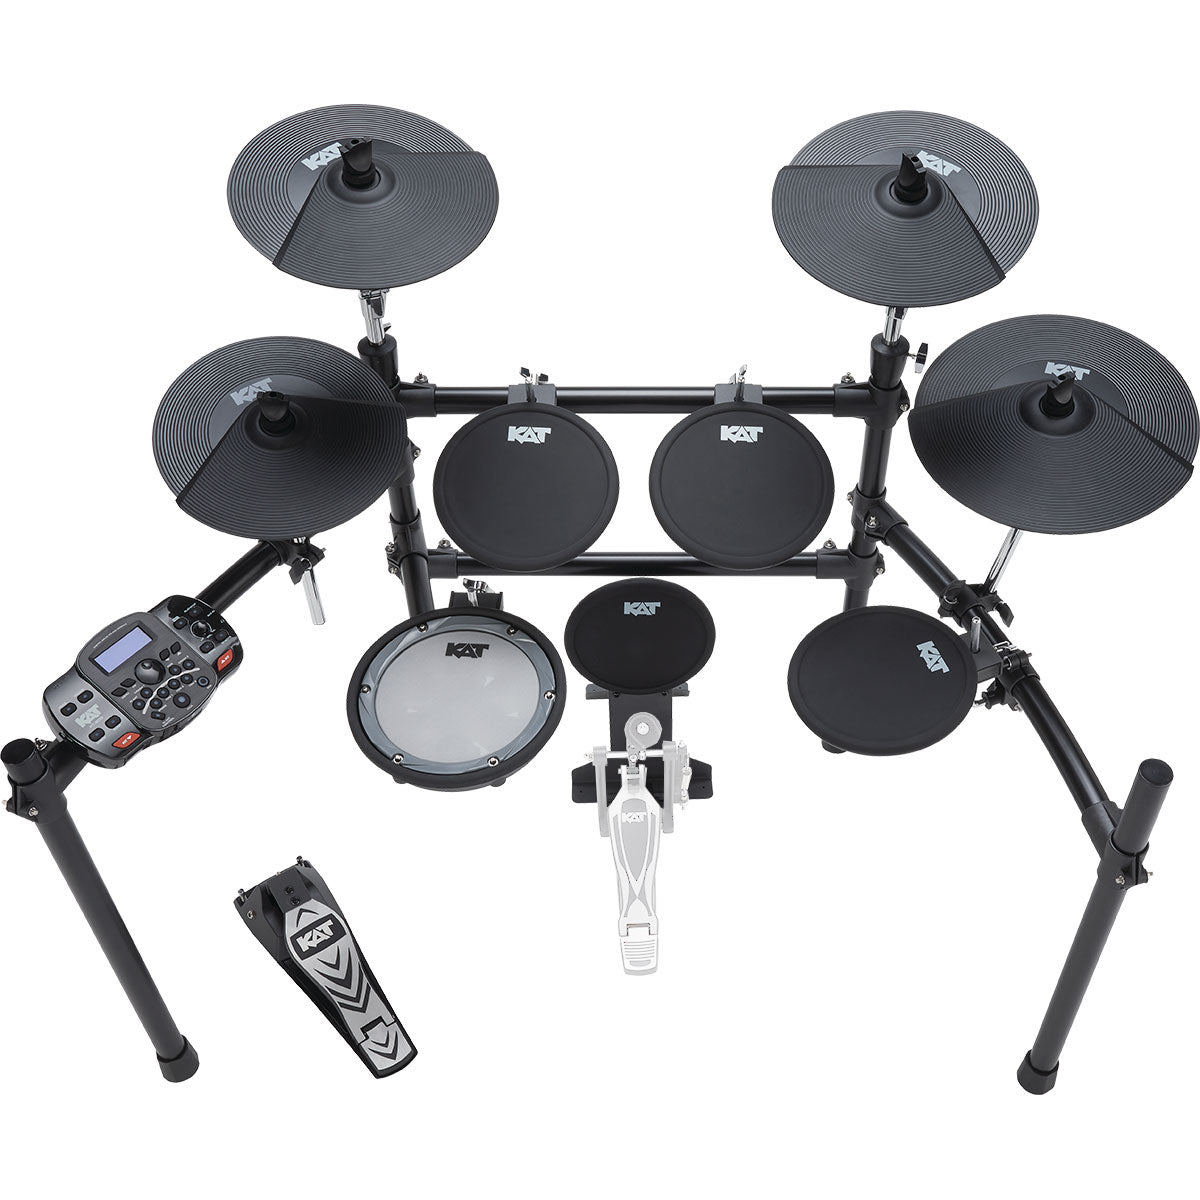 Perspective view of Kat Percussion KT-200 Electronic Drum Set showing top and back